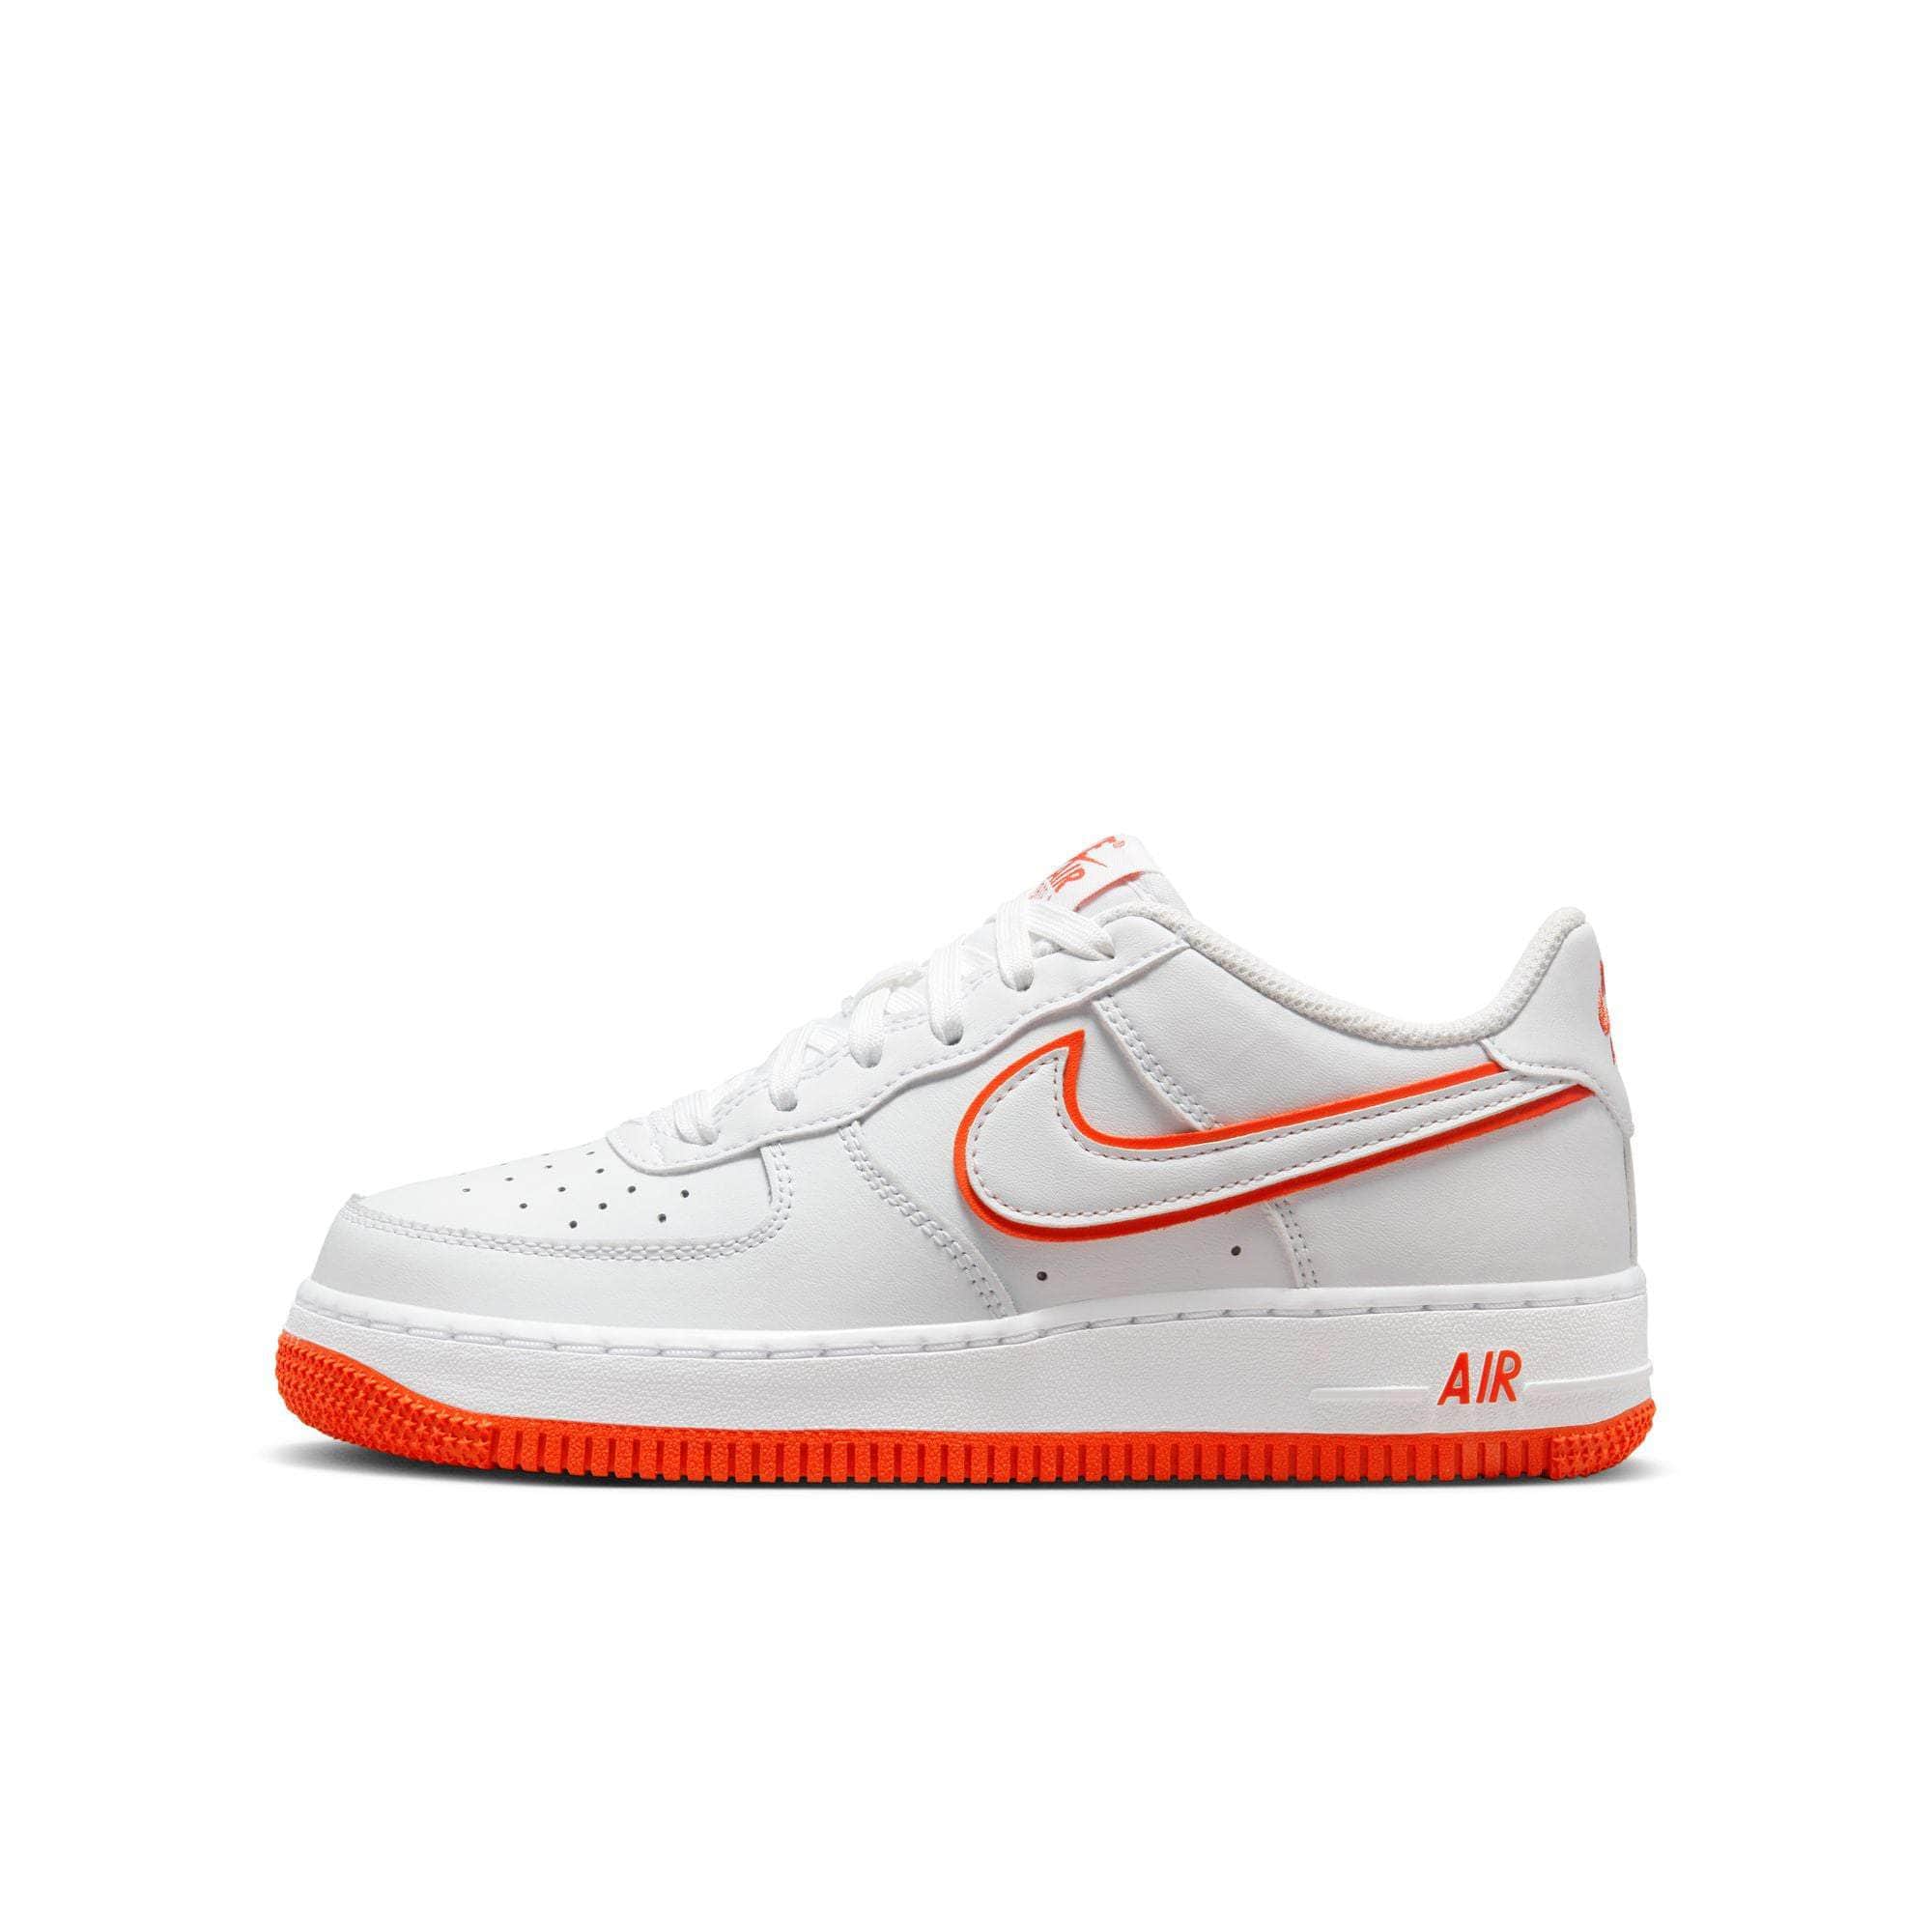 Nike Air Force 1 '07 Picante Red Sneakers